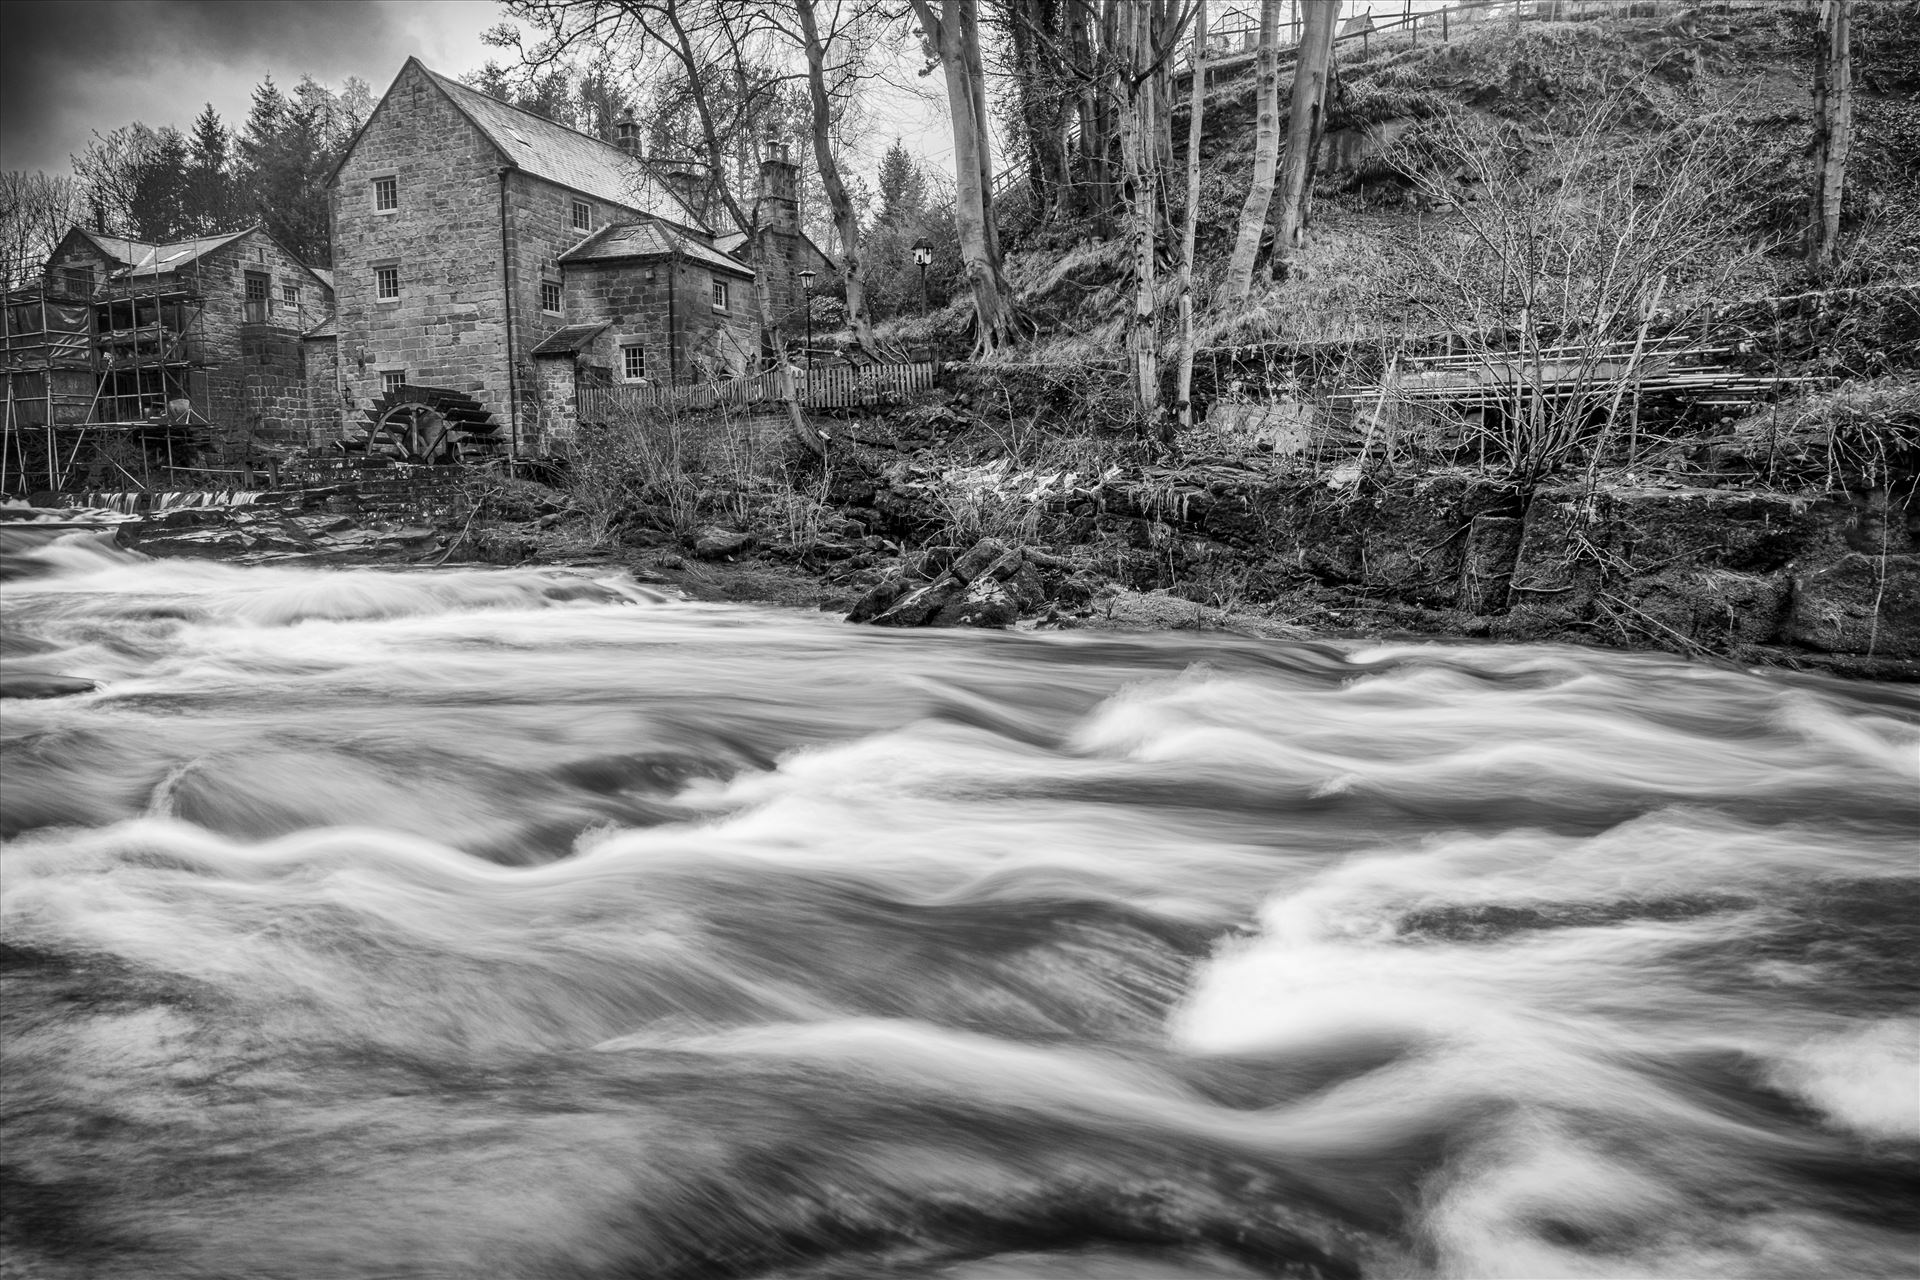 Thrum Mill, Rothbury Thrum Mill is situated on the river Coquet just to the east of Rothbury. The building dates back to 1665, but has not worked as a mill for many years. The tiny hamlet of Thrum was originally the habitation of mill workers. by philreay